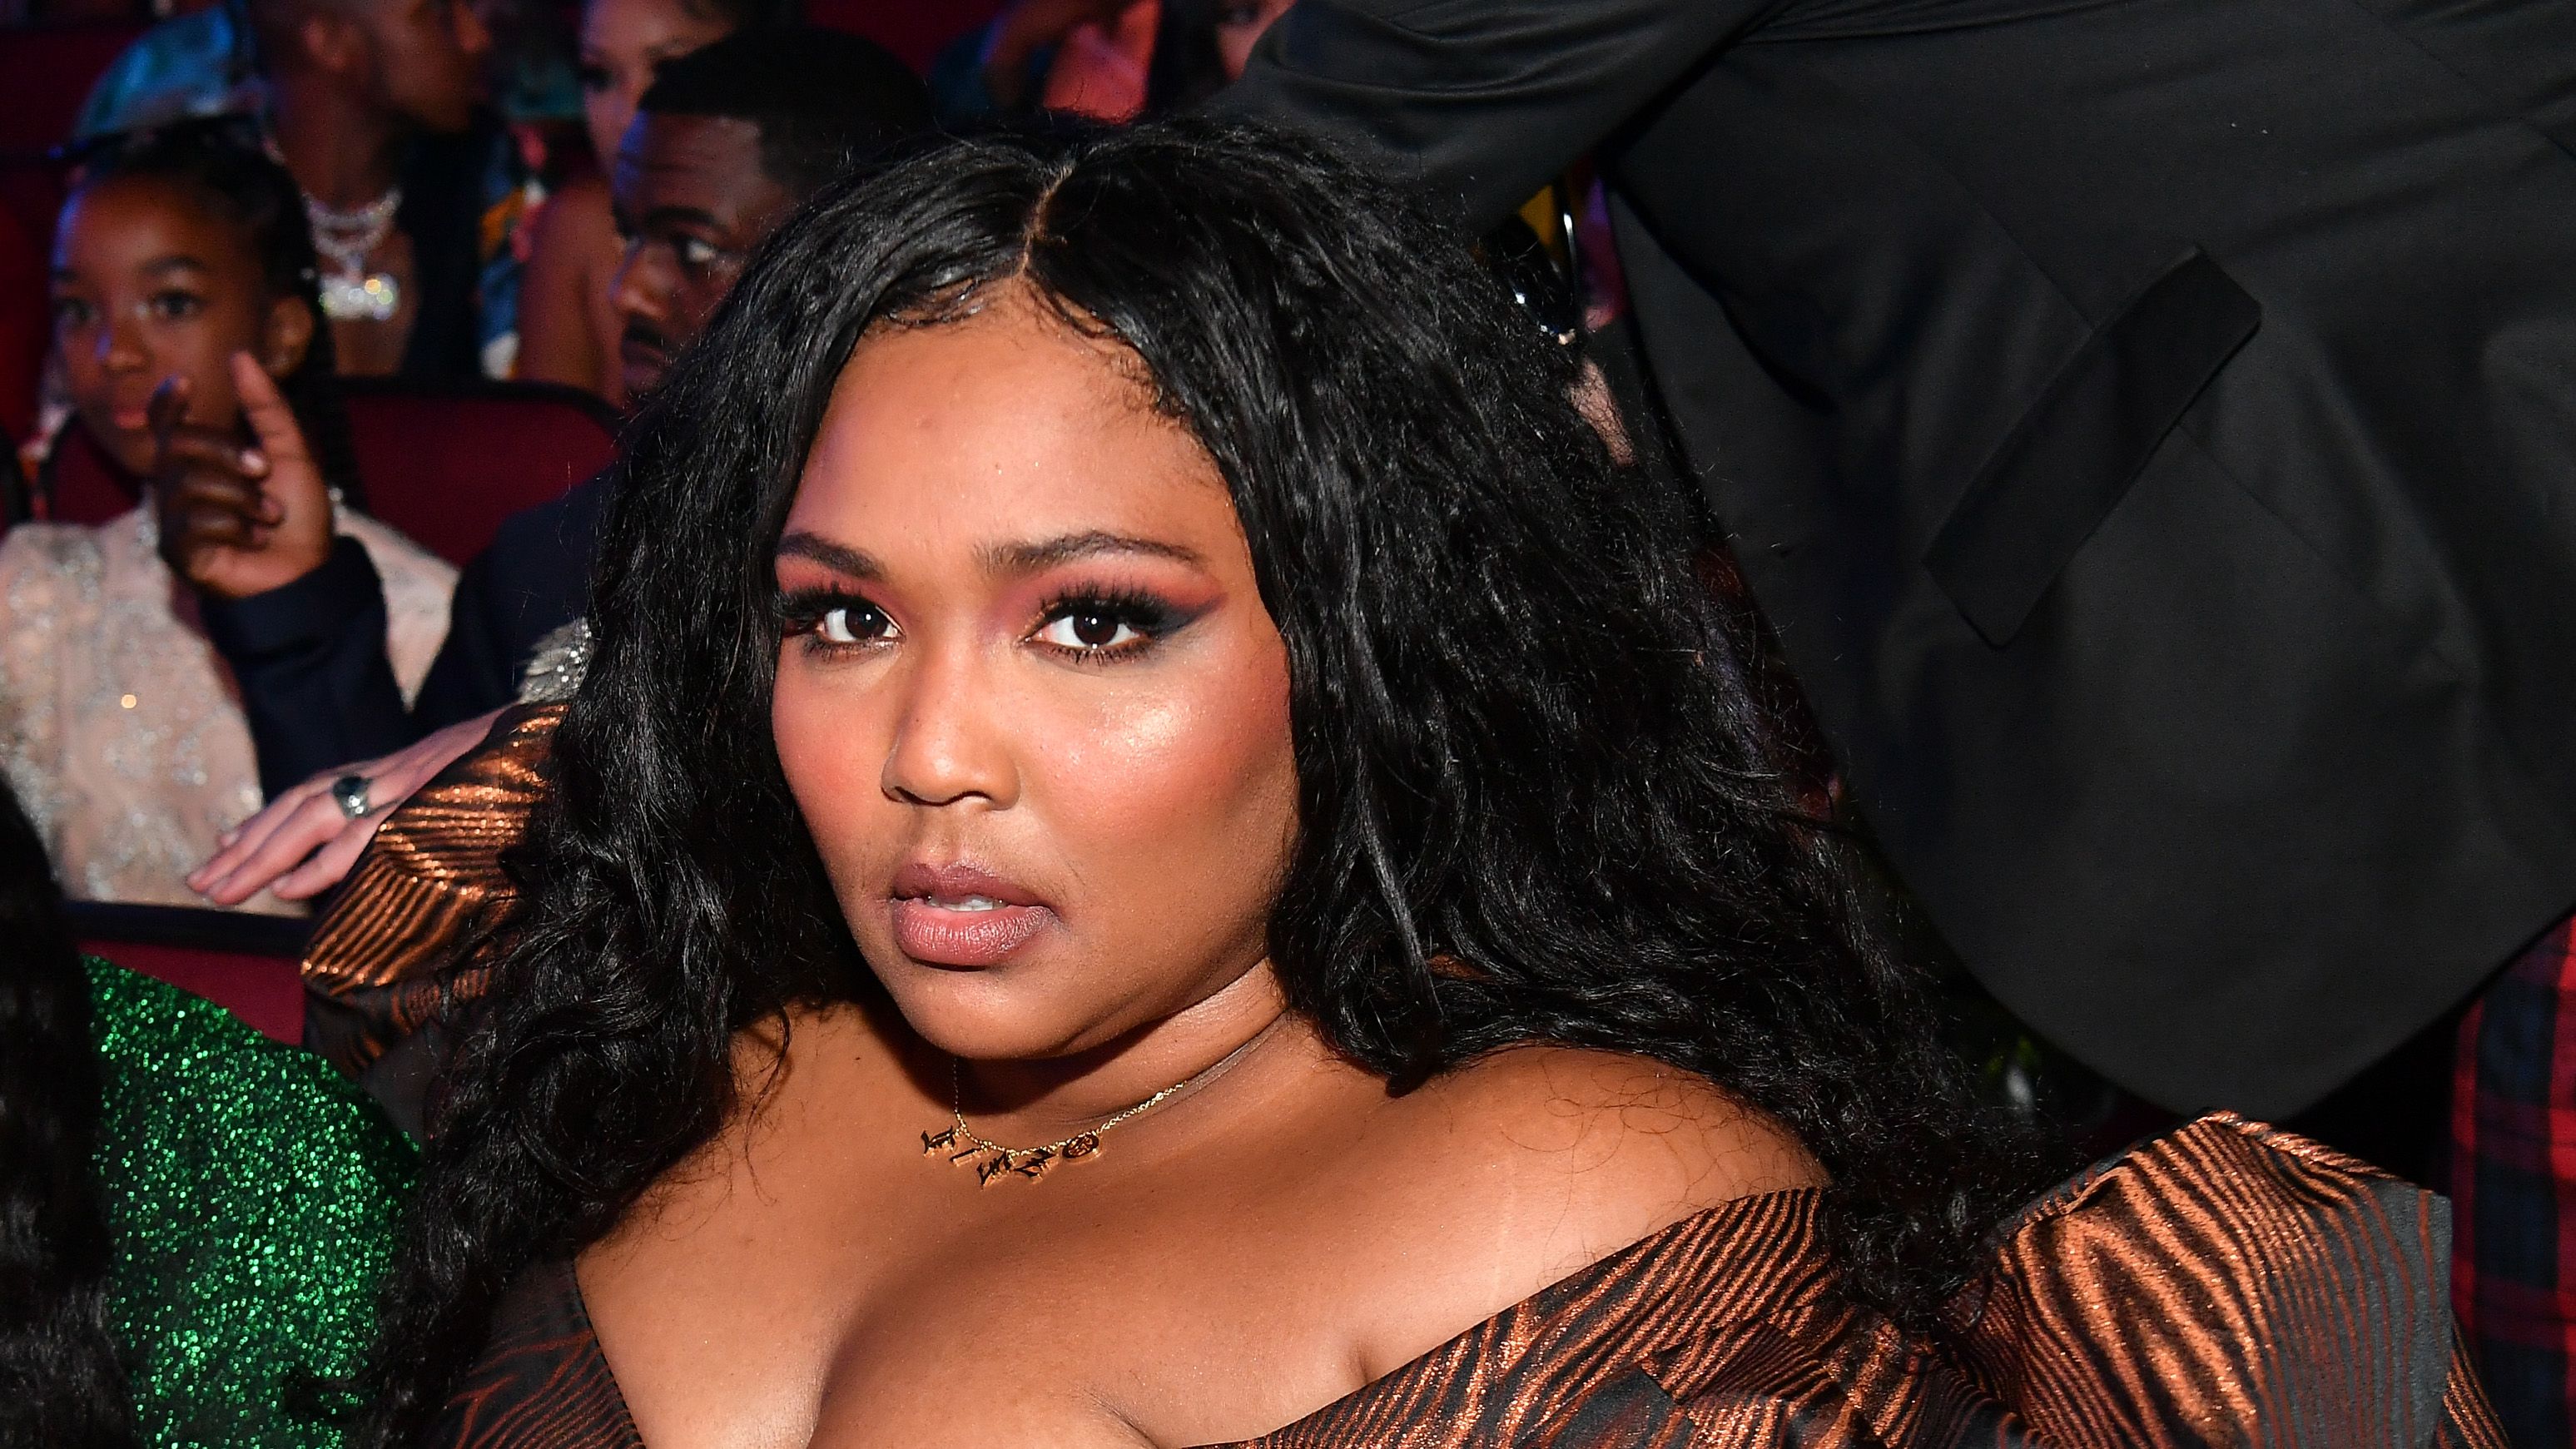 https://hips.hearstapps.com/hmg-prod/images/lizzo-during-the-2019-bet-awards-at-microsoft-theater-on-news-photo-1157882361-1567094631.jpg?crop=1xw:0.72118xh;center,top